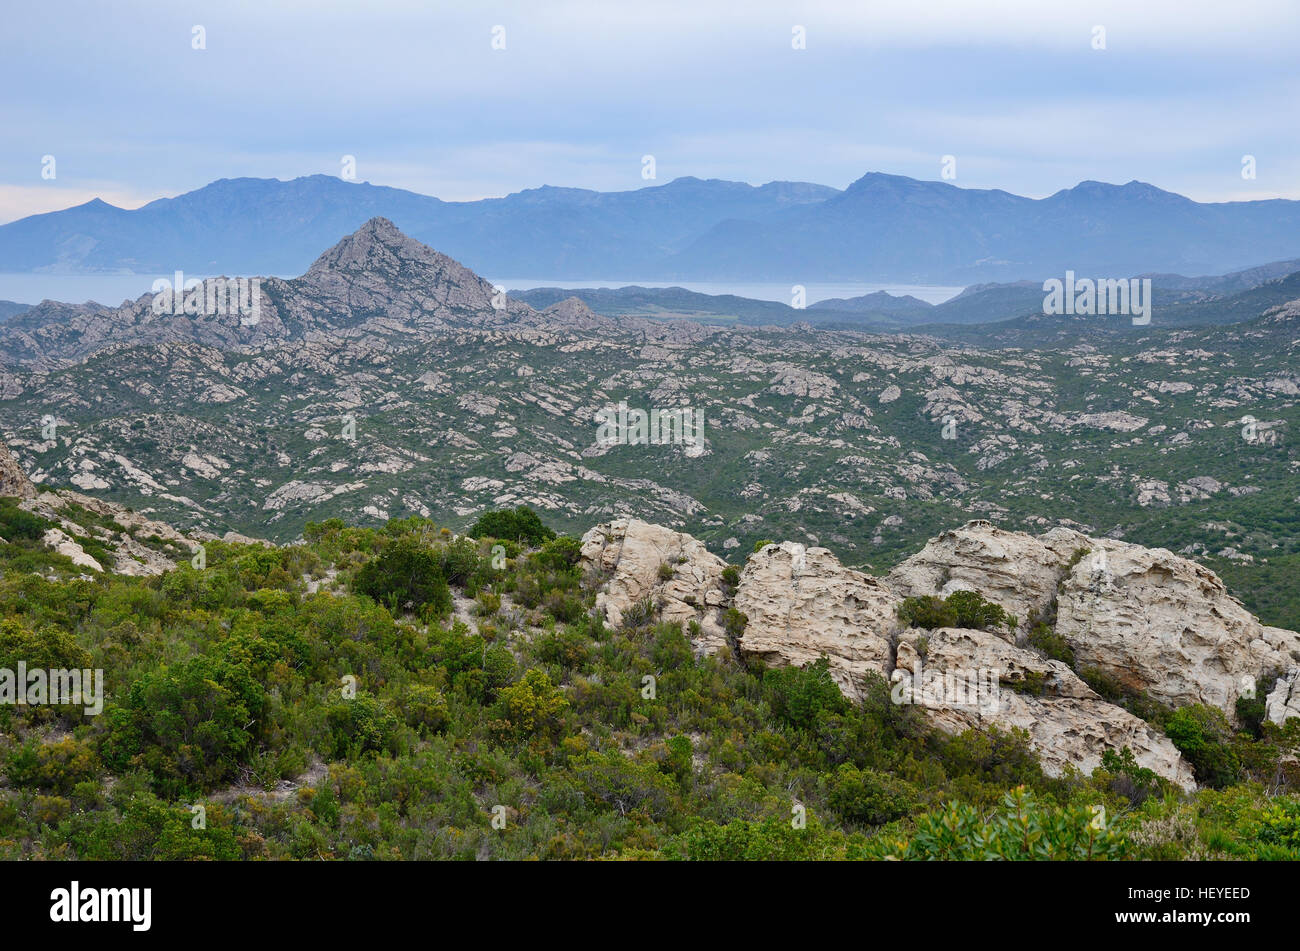 The Desert des Agriates is a barren, wild and beautiful wilderness in the Balagne region of the northern Corsica. This is the dry mountain area covere Stock Photo